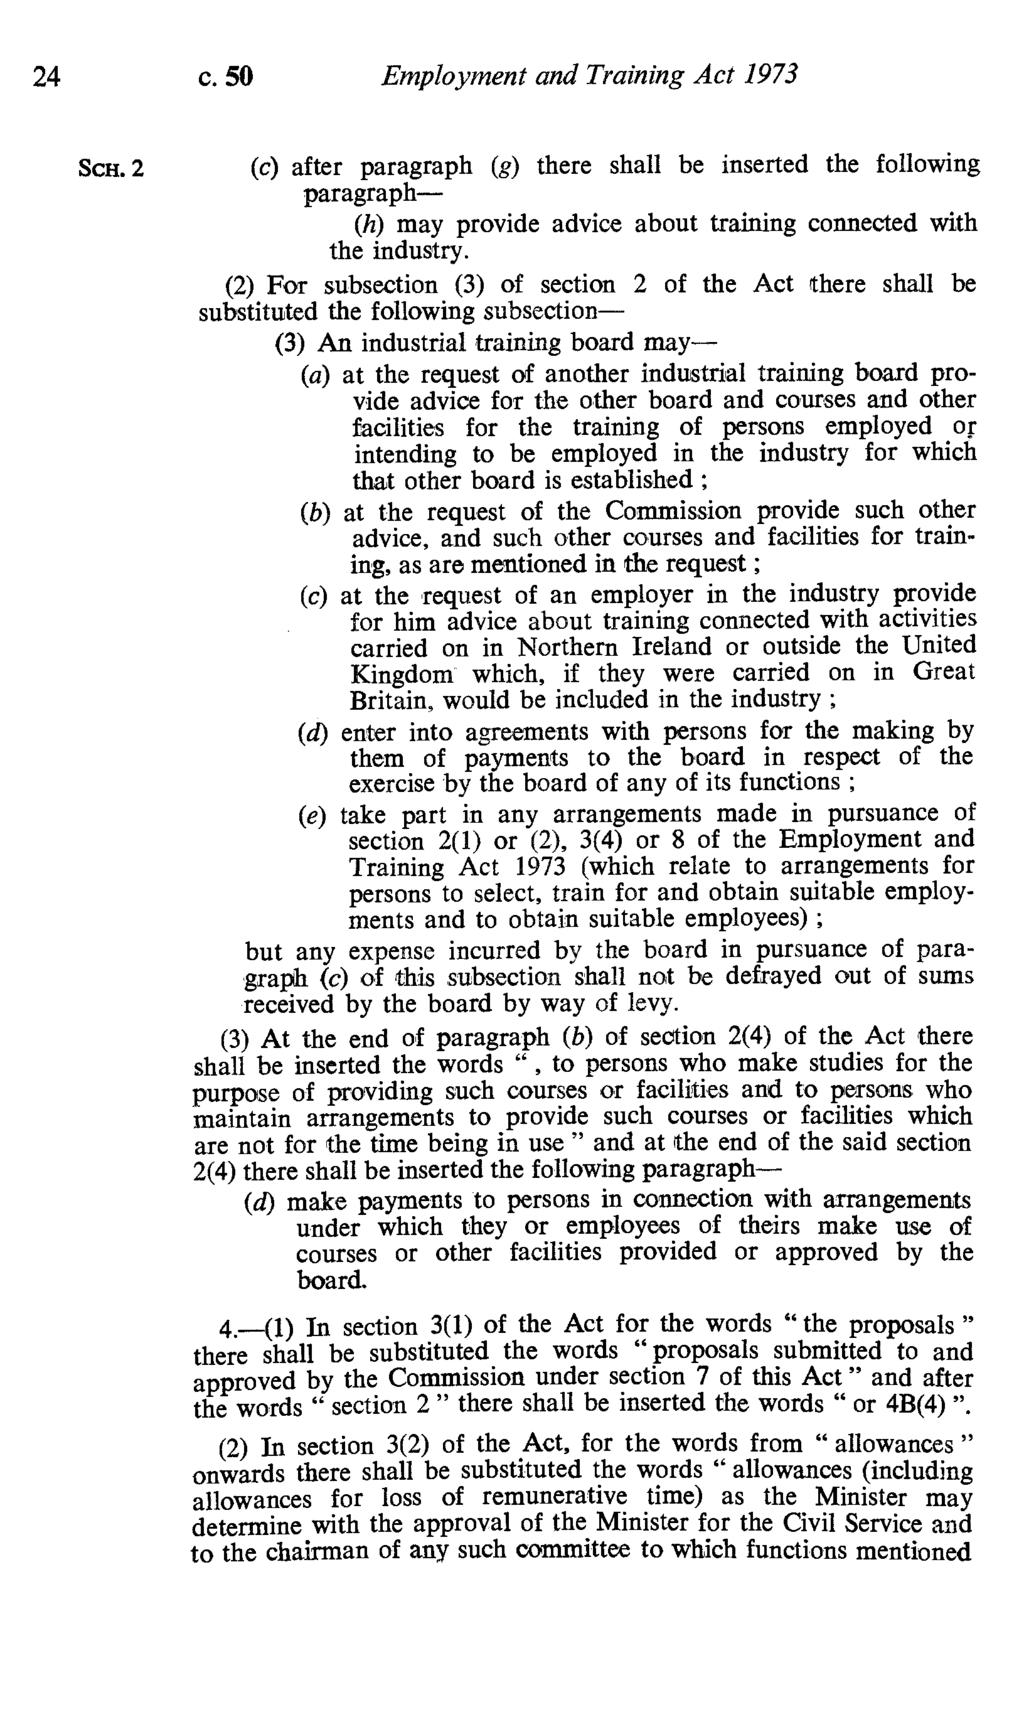 24 c. 50 Employment and Training Act 1973 Scx.2 (c) after paragraph (g) there shall be inserted the following paragraph- (h) may provide advice about training connected with the industry.